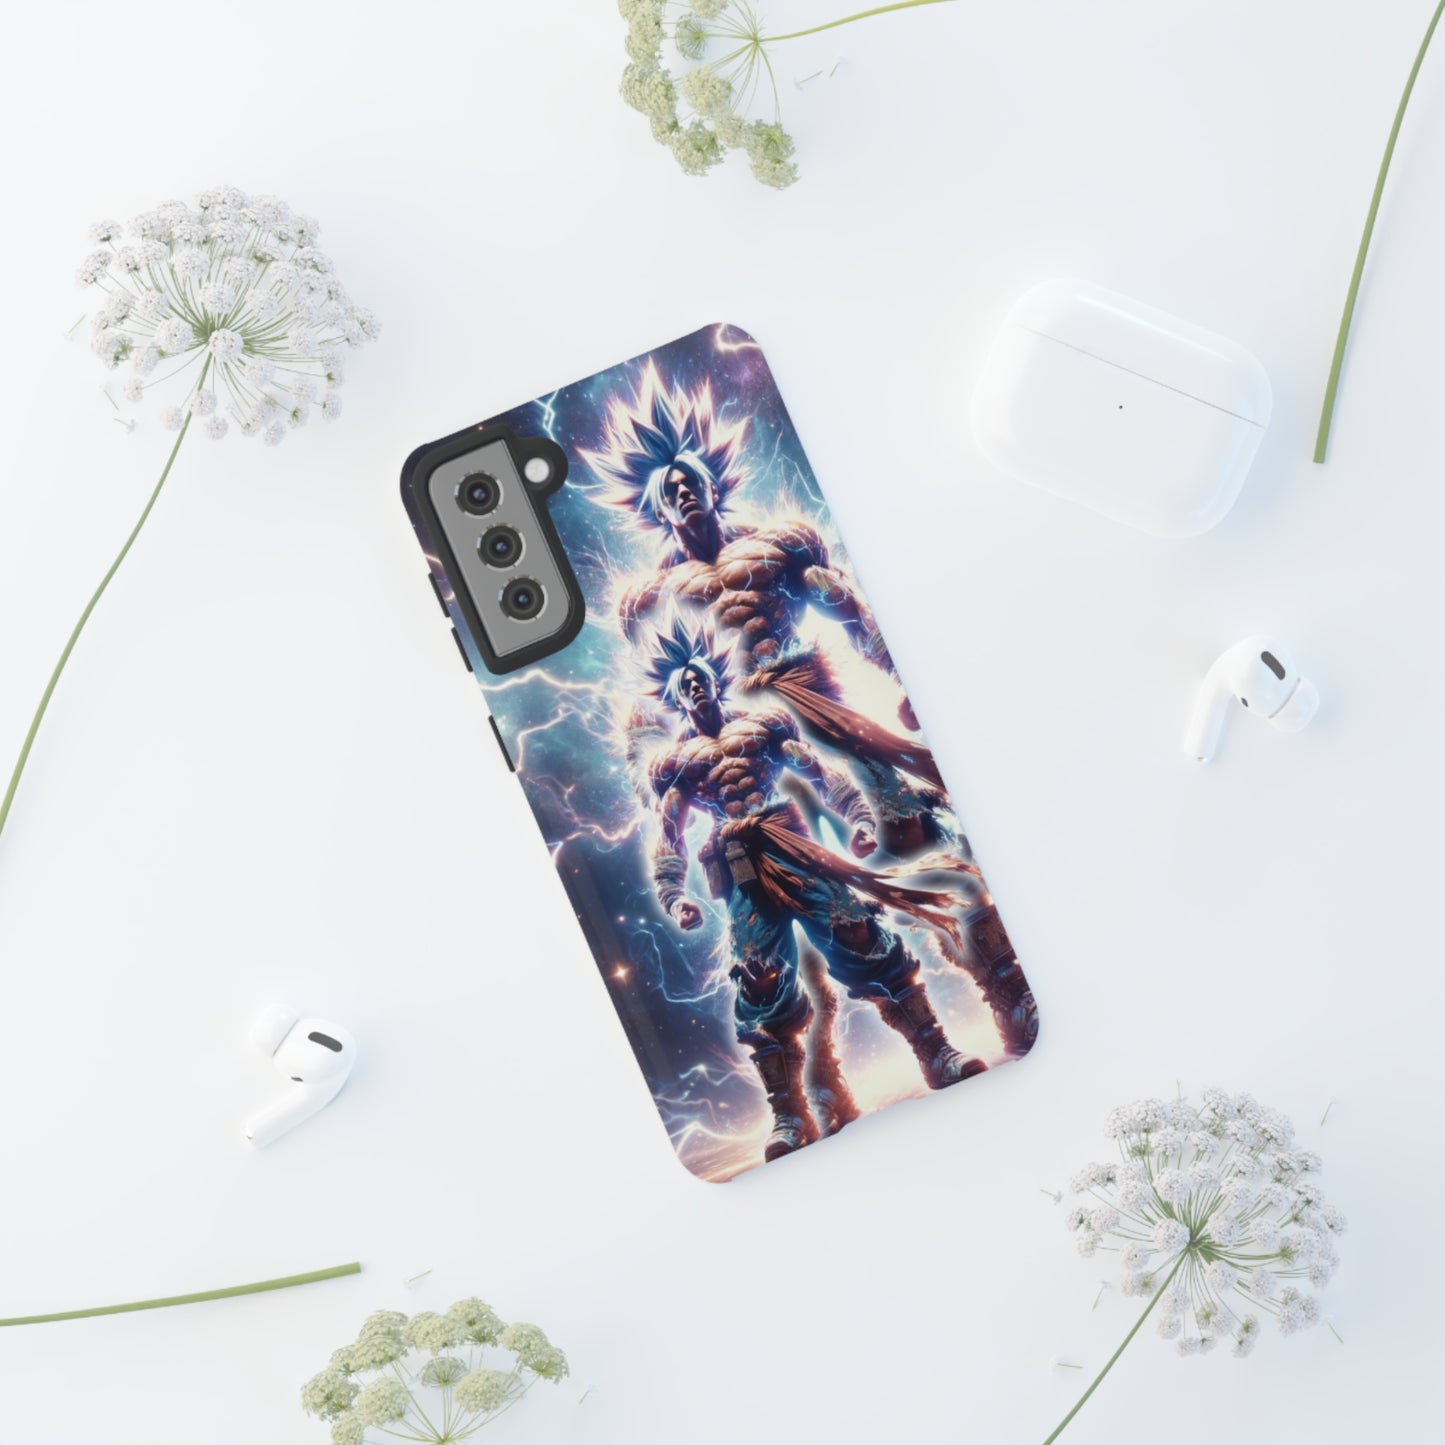 Electric Titan - Cell Phone Case